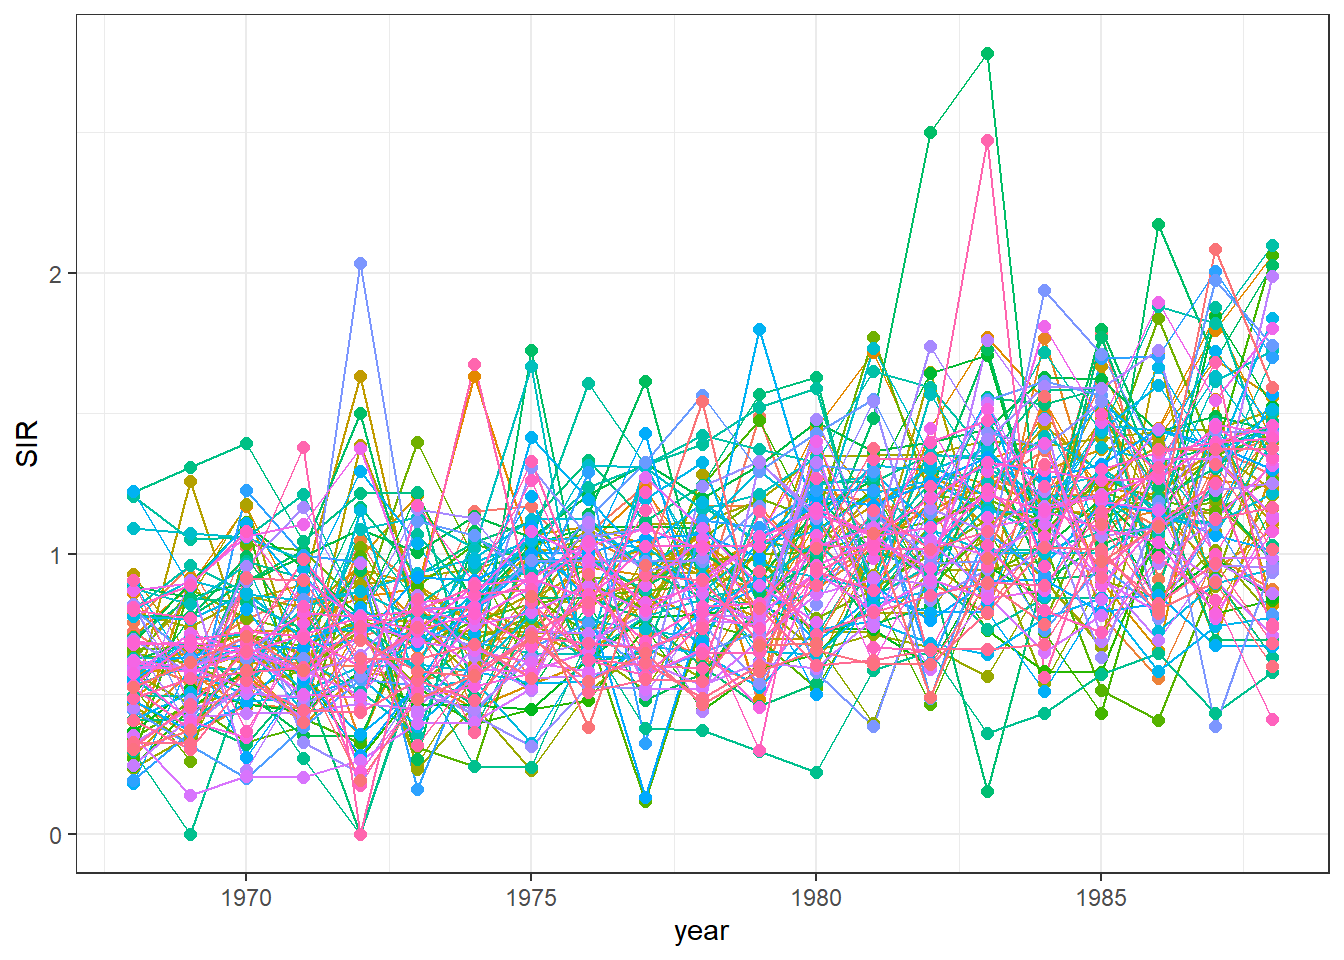 Time plot of lung cancer SIR in Ohio counties from 1968 to 1988 created without a legend.